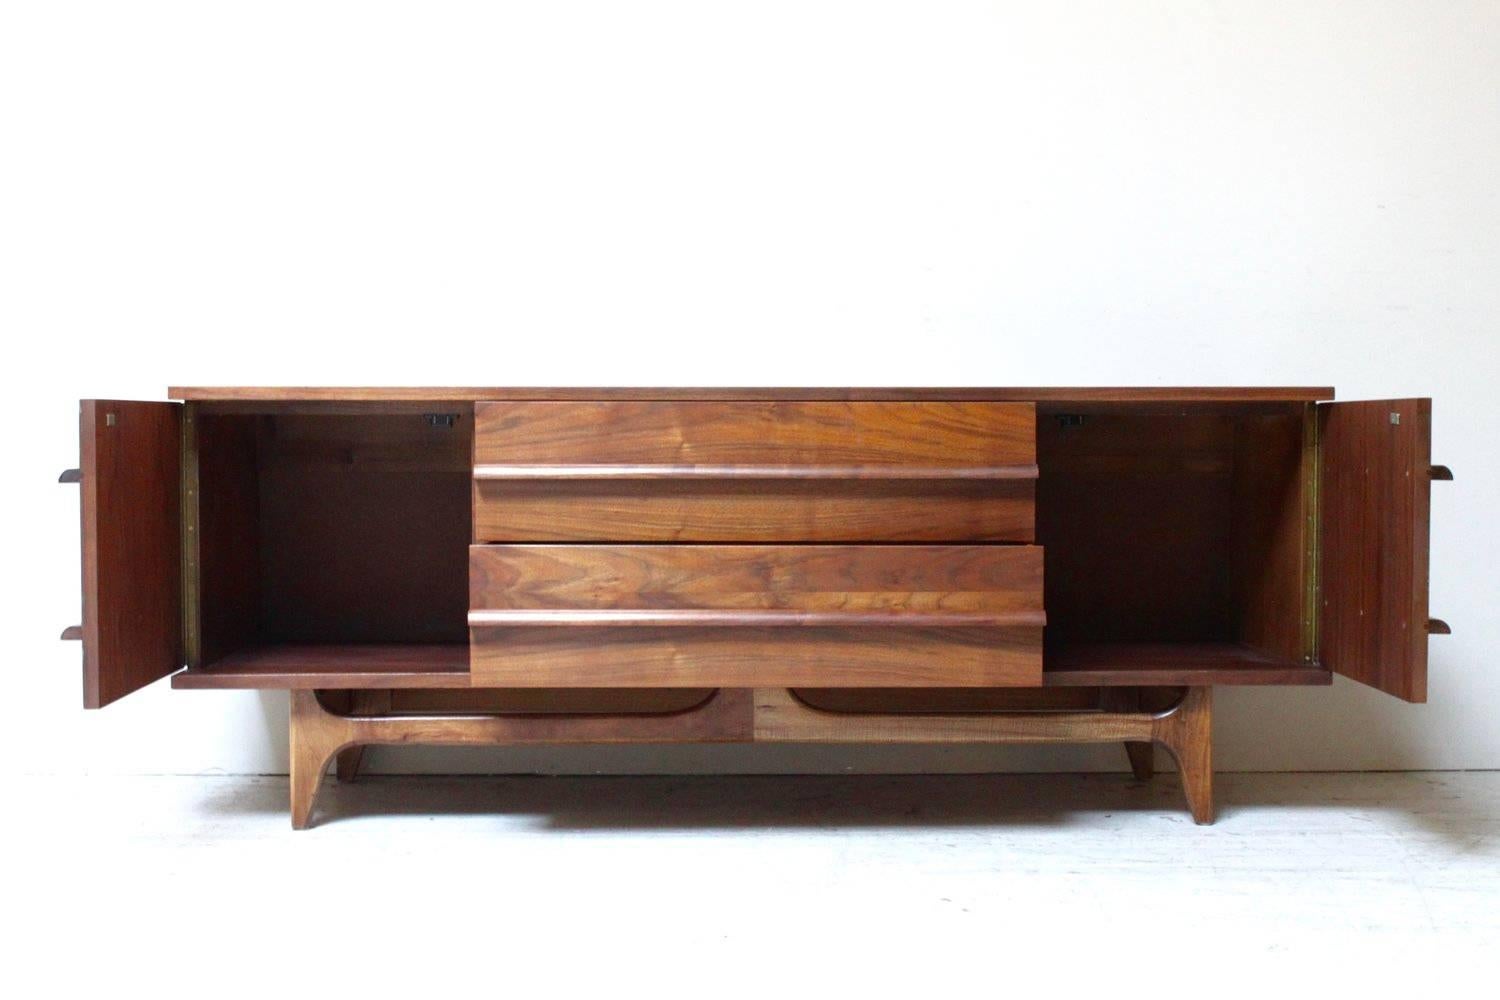 Bow front black walnut credenza by Young Mfg. Co., circa 1960.